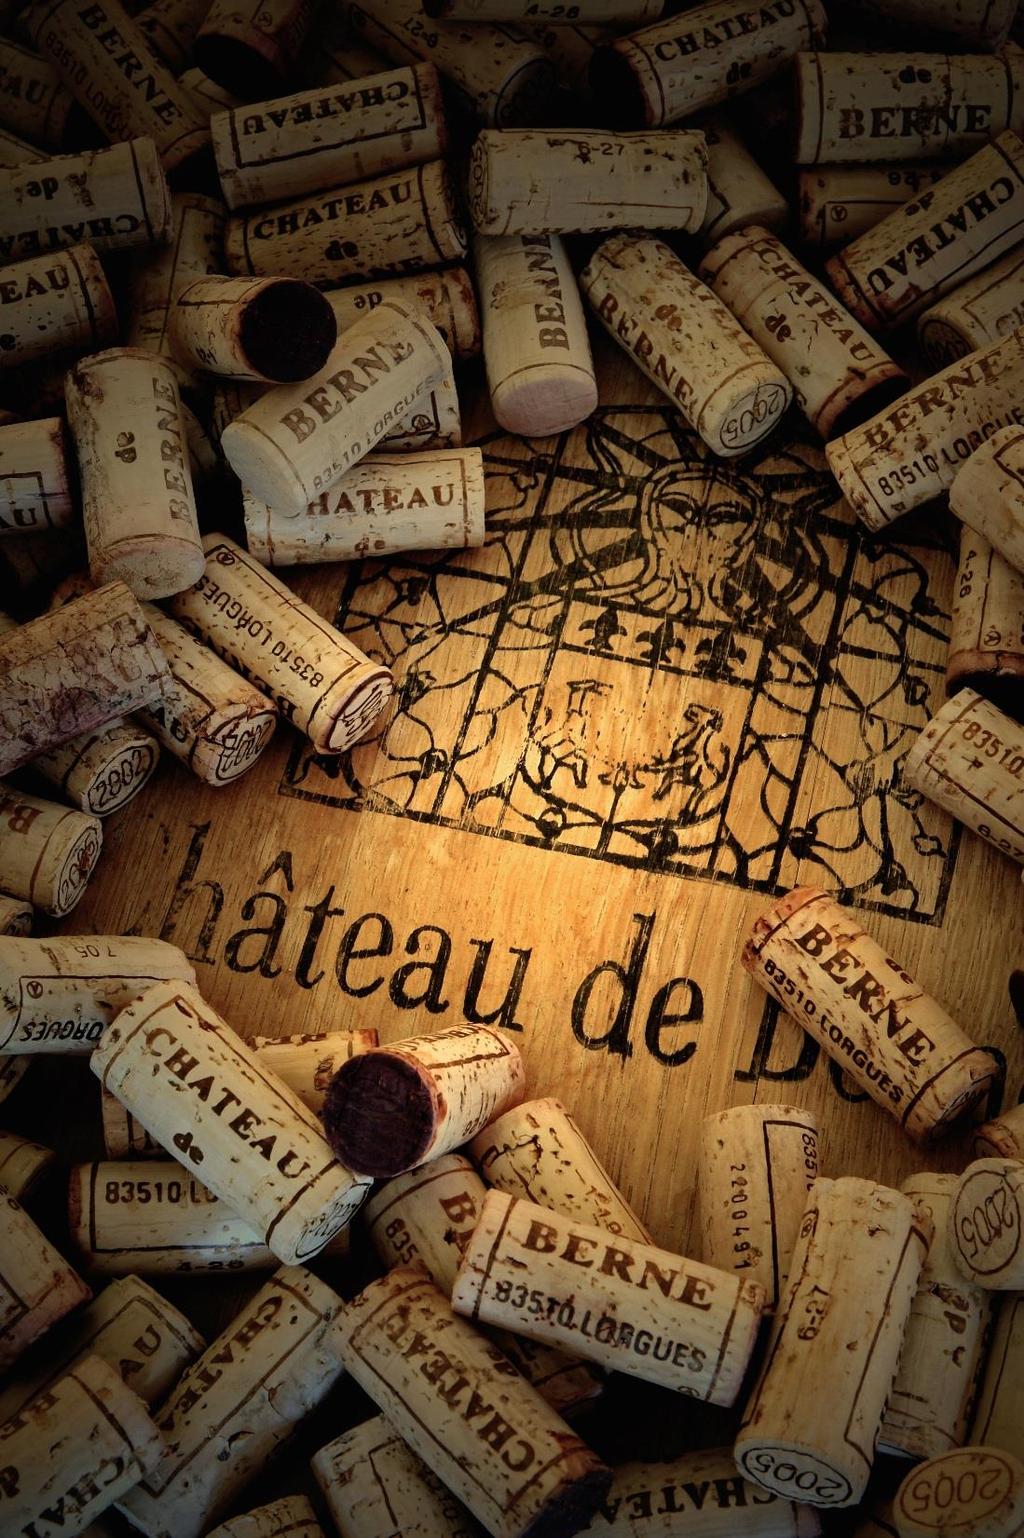 Deeply committed to quality, Château de Berne is planted with 277 acres of vines producing Côtes de Provence AOP (Protected